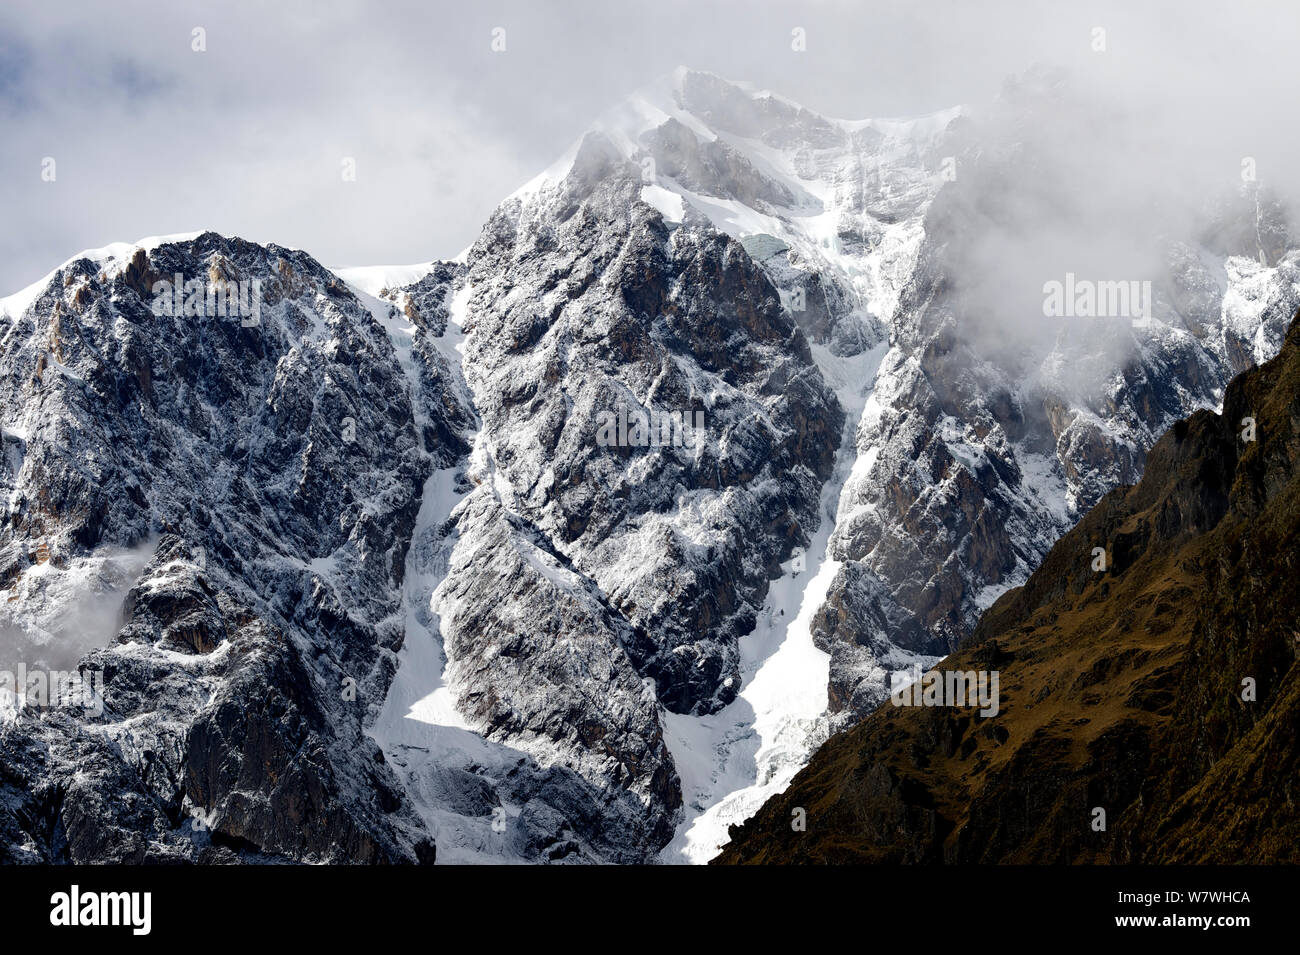 Snowy peaks of the Illimani Mountain, Andes, Bolivia, October 2013. Stock Photo